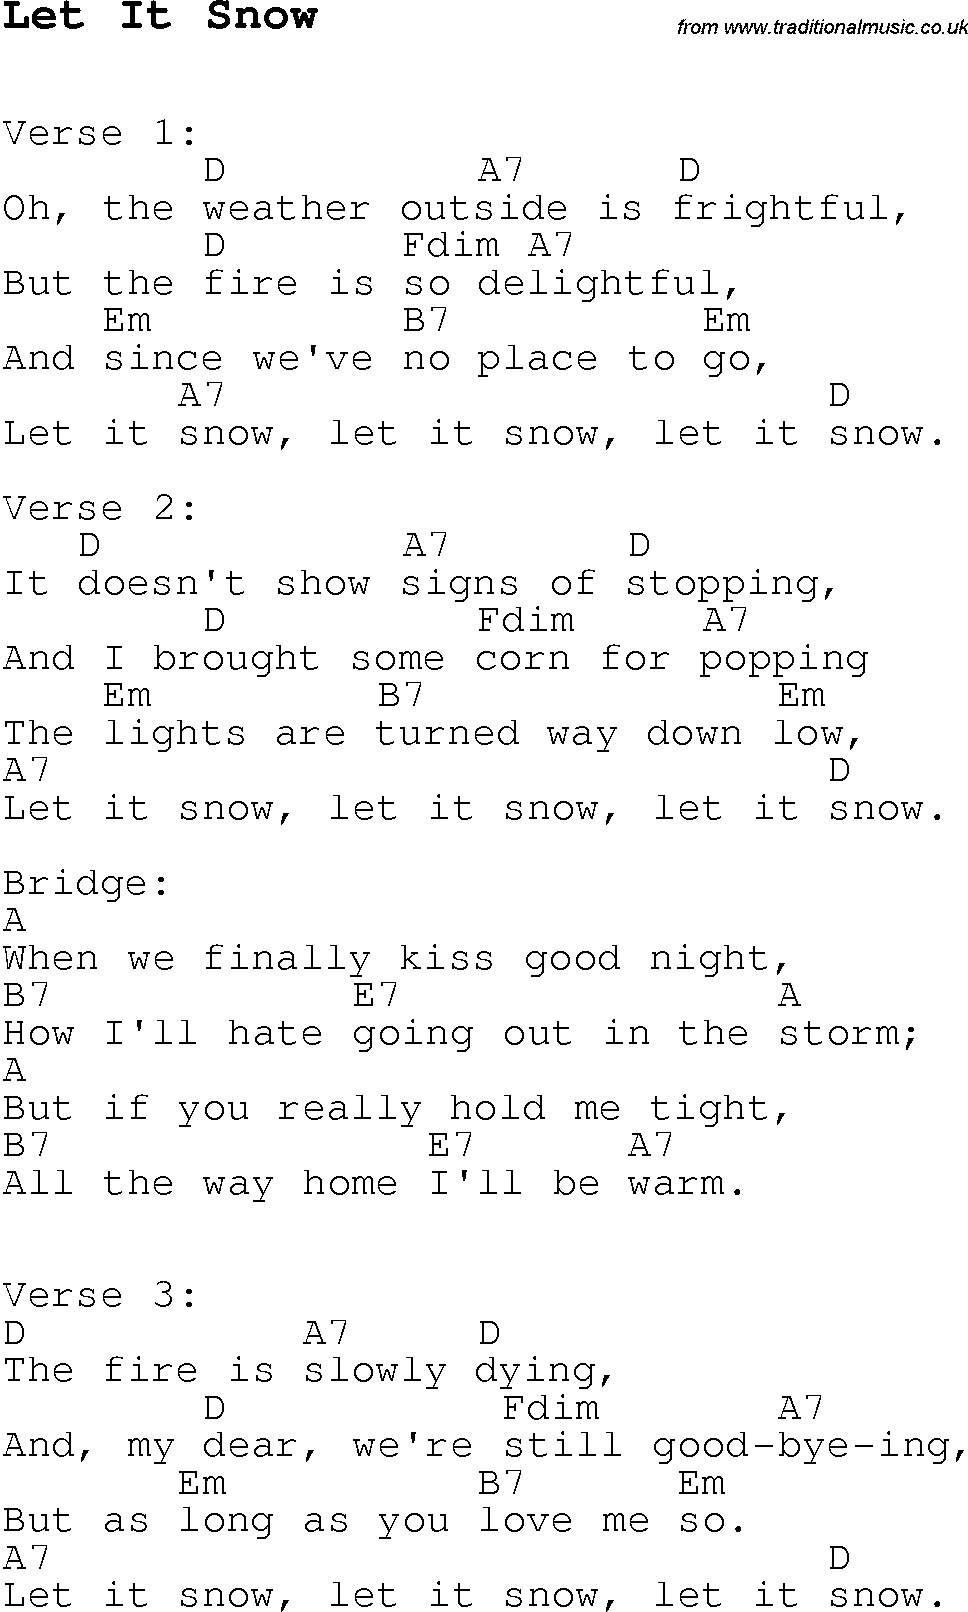 Christmas Songs and Carols, lyrics with chords for guitar banjo for Let It Snow